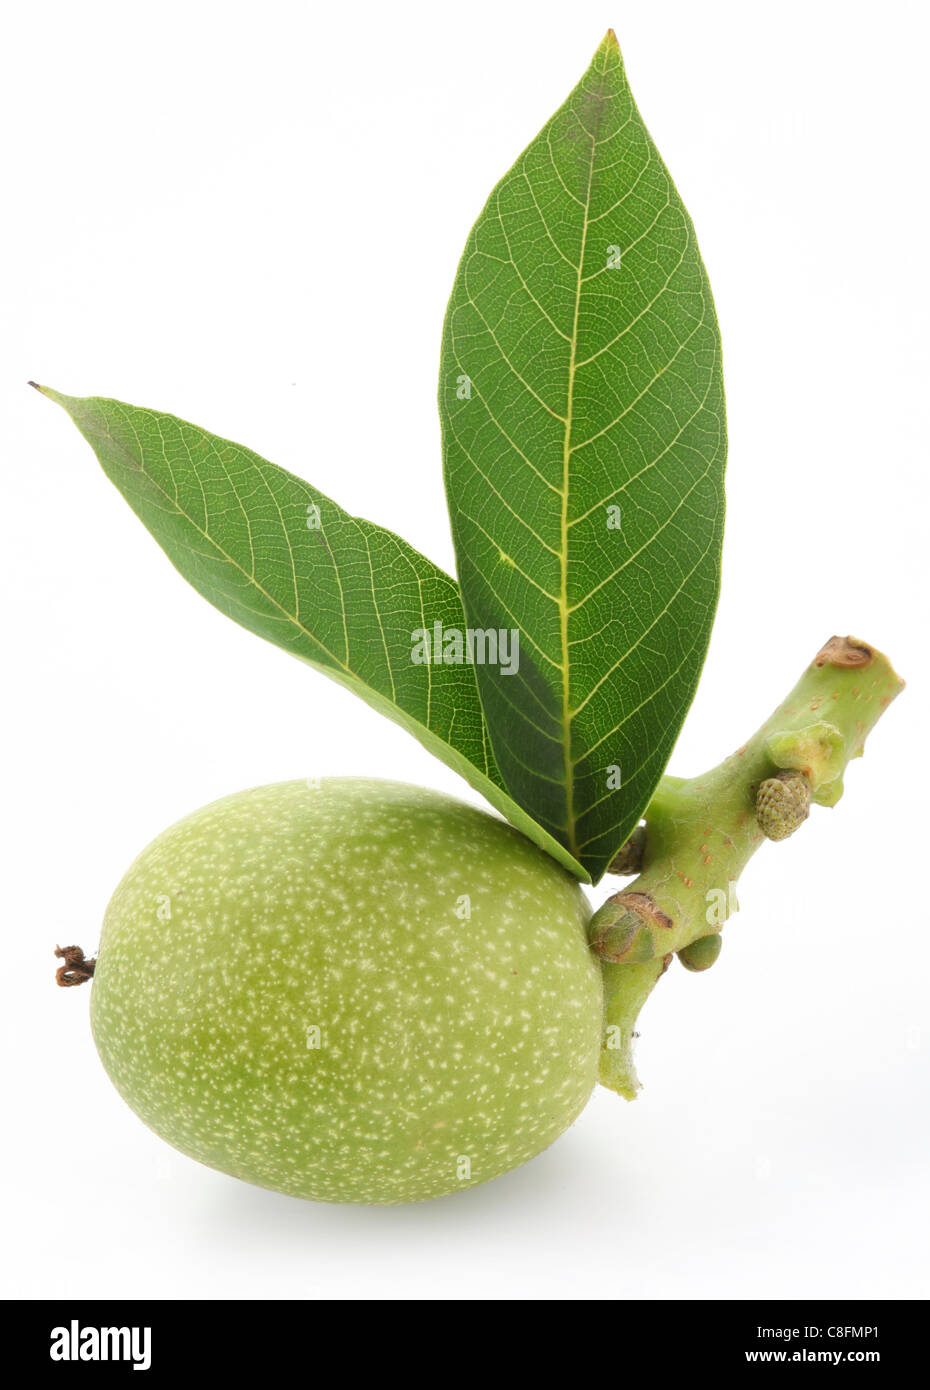 Green walnut with leaves. Isolated on a white background. Stock Photo